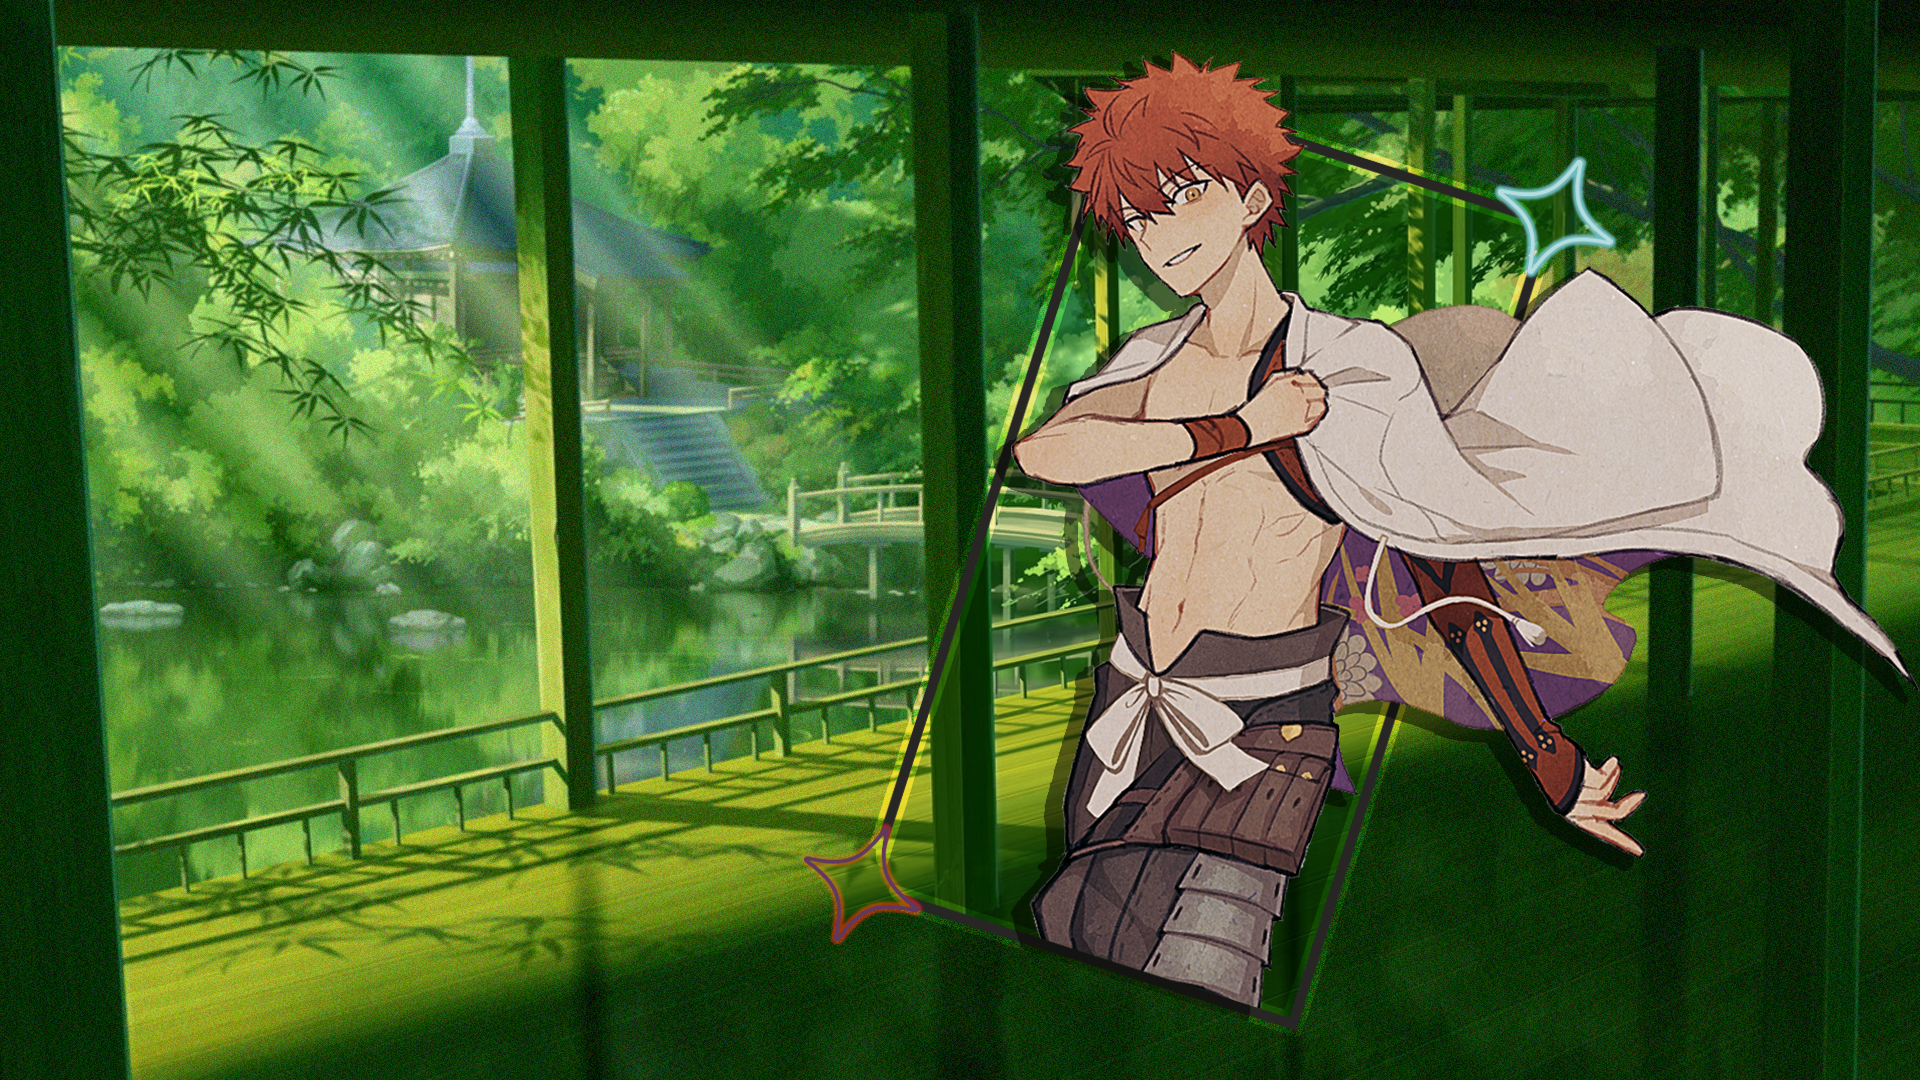 Anime 1920x1080 Shirou Emiya Fate/Grand Order fantasy art picture-in-picture anime boys anime